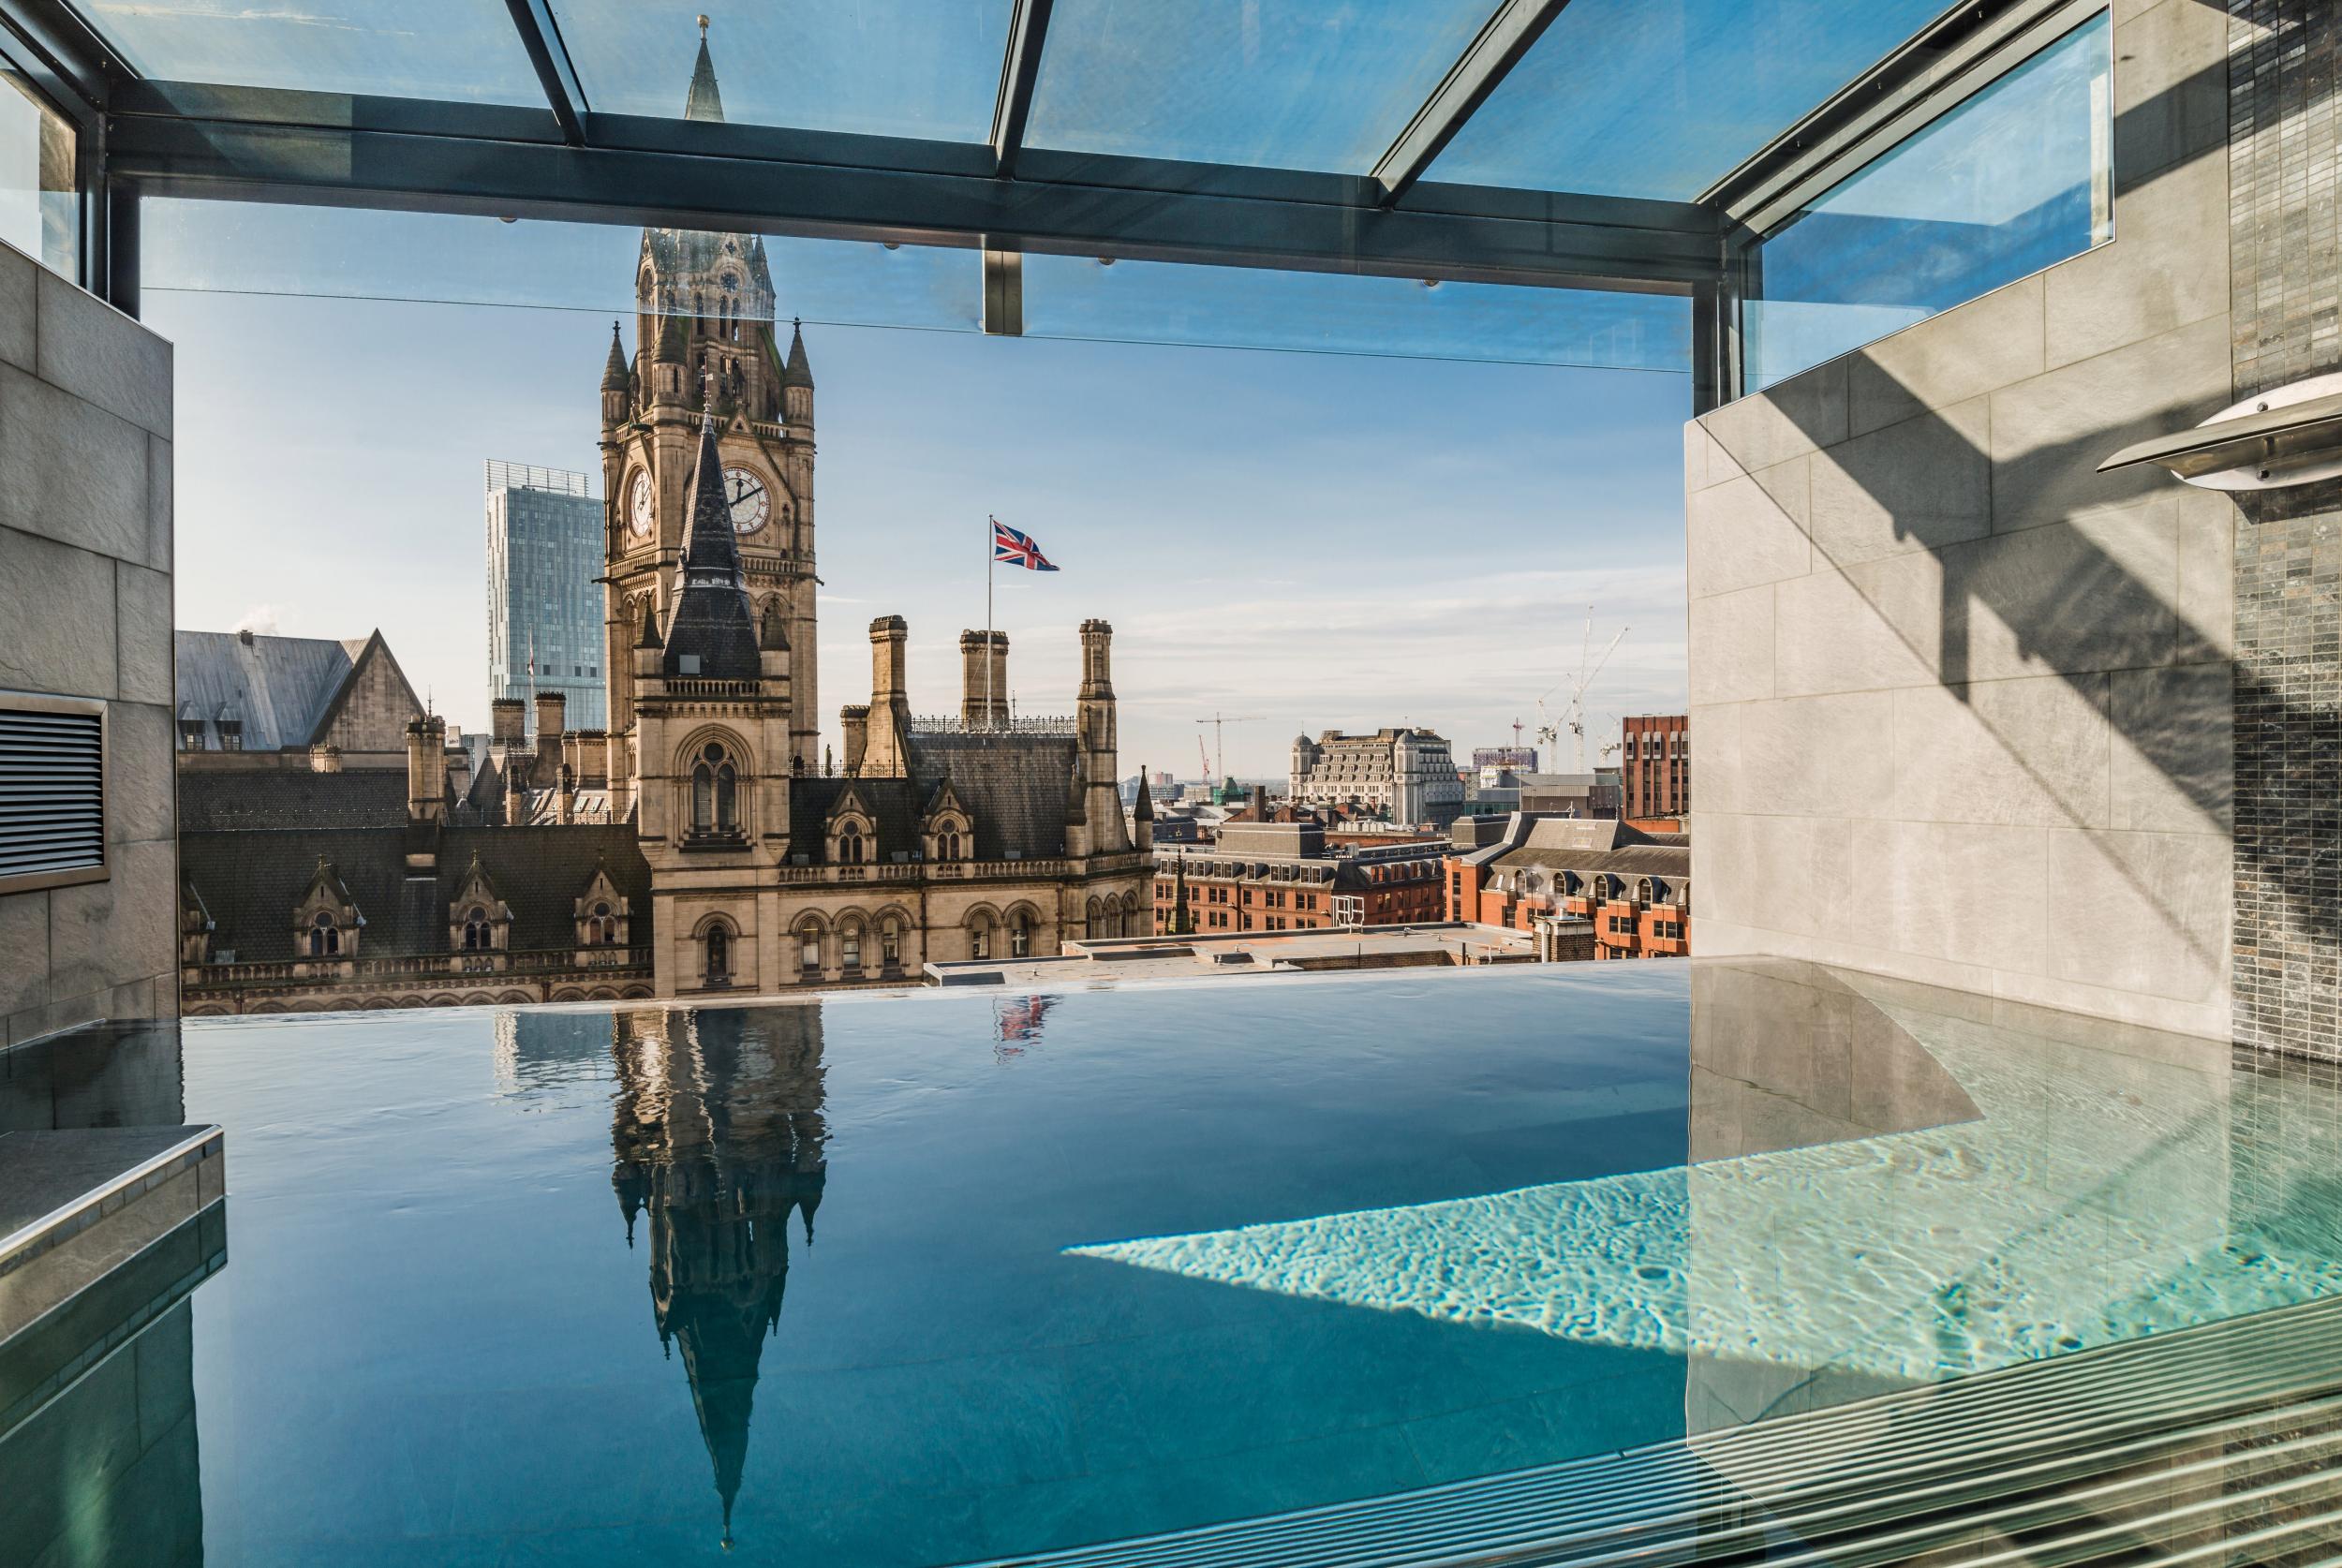 King Street Townhouse boasts an infinity pool on the seventh floor, plus relaxation rooms